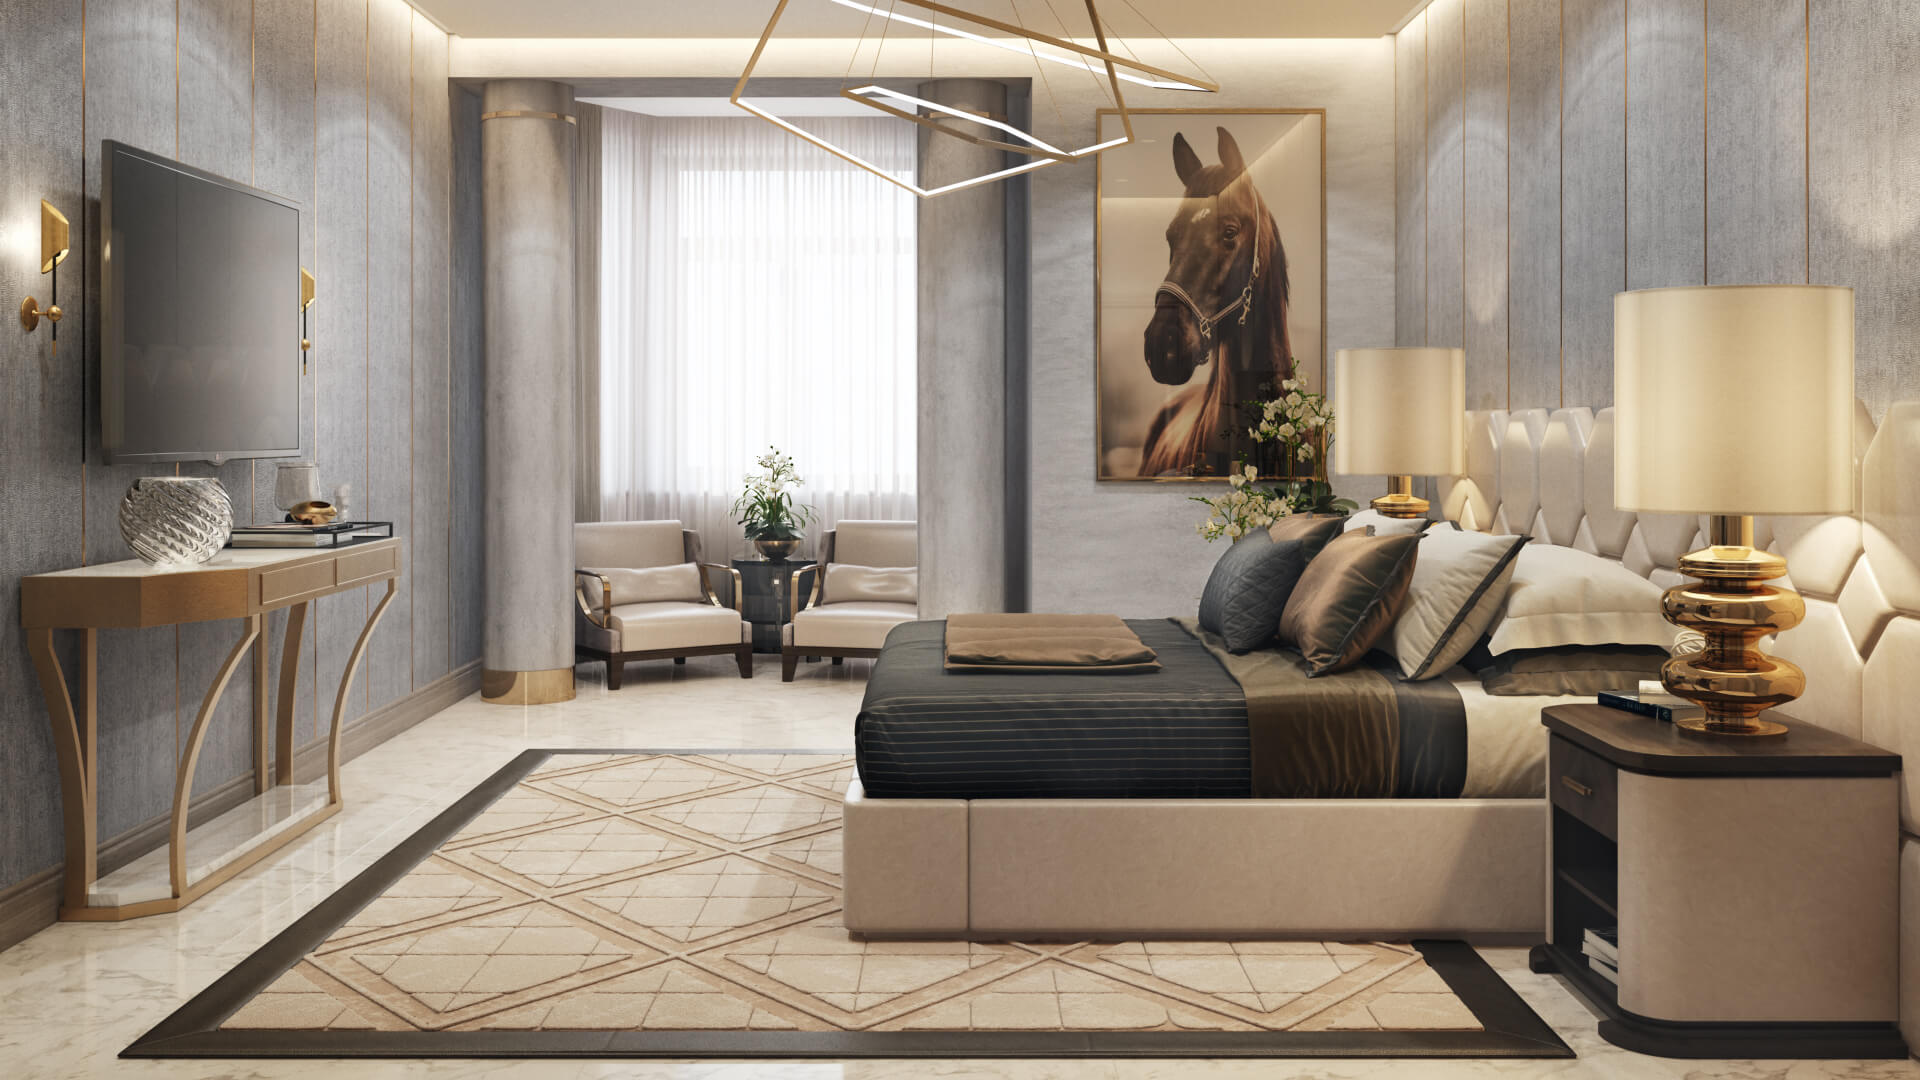 High-Quality Hotel Interior Rendering for a Project Pitch